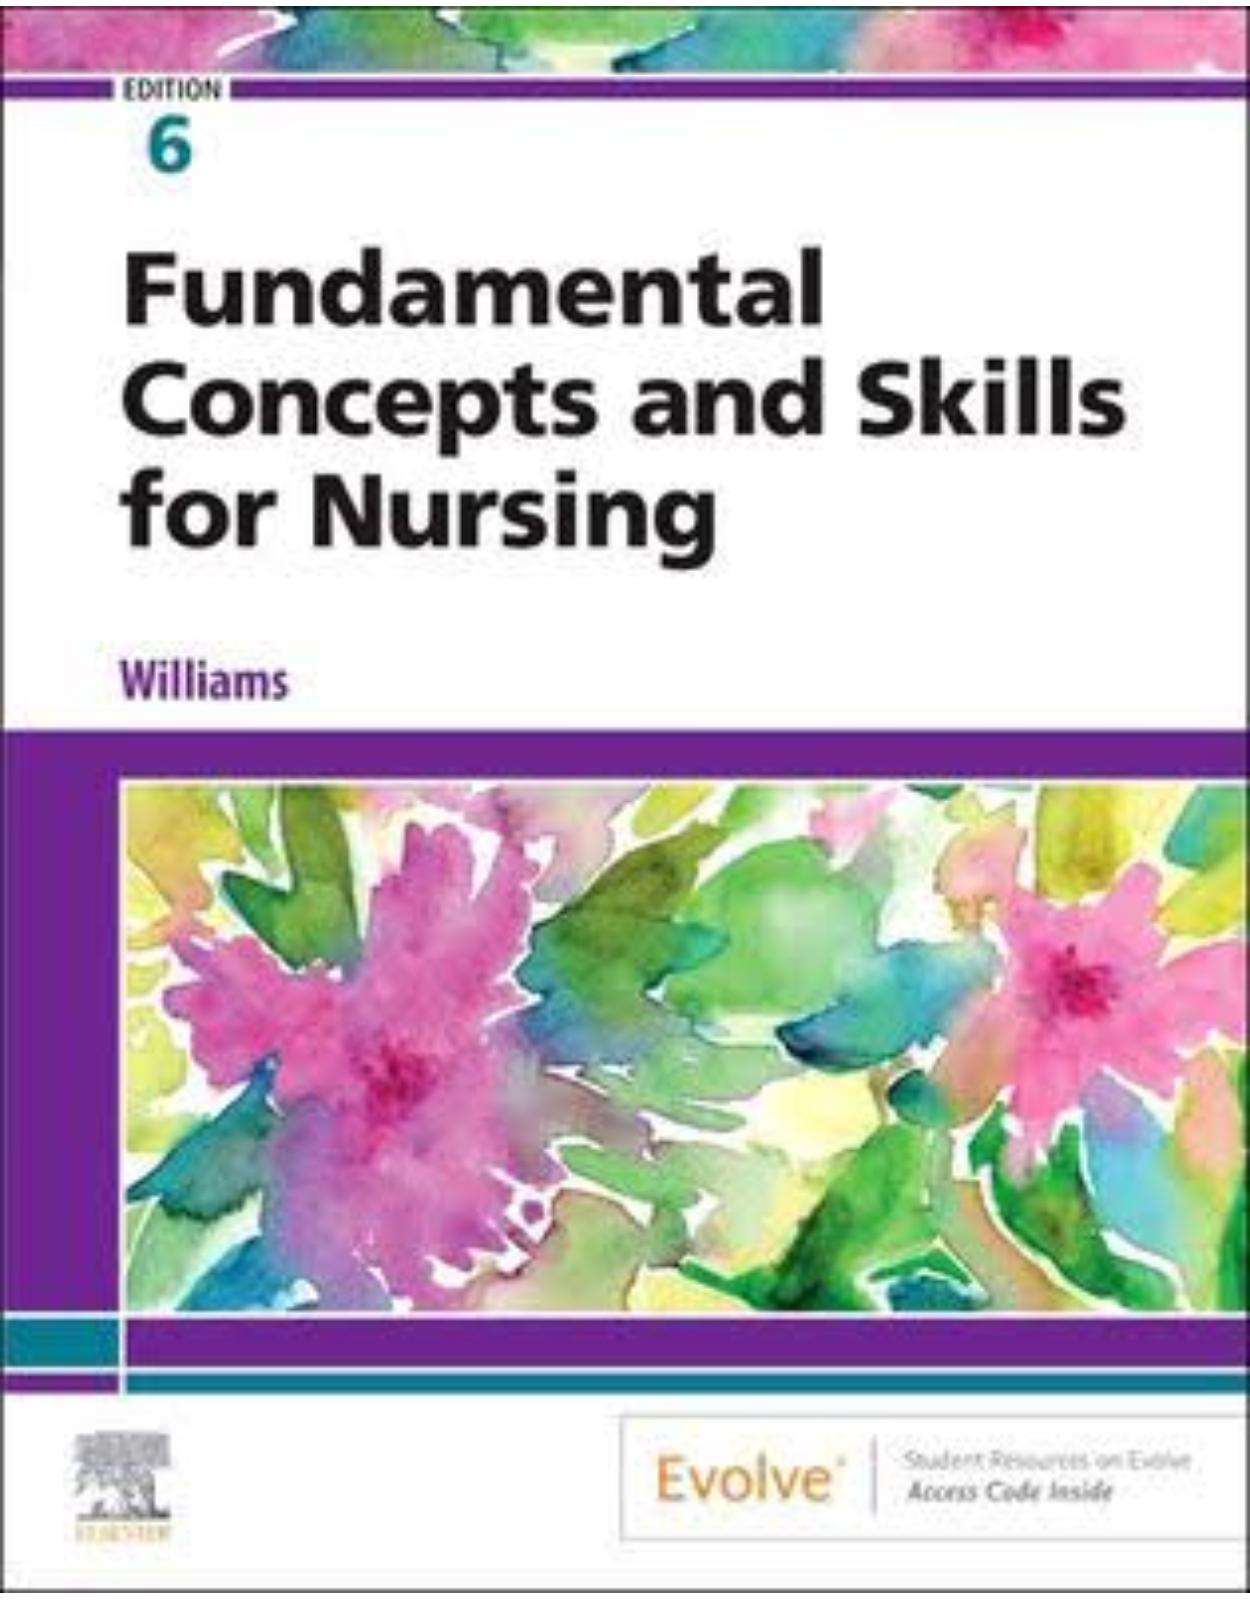 Fundamental Concepts and Skills for Nursing, 6th Edition